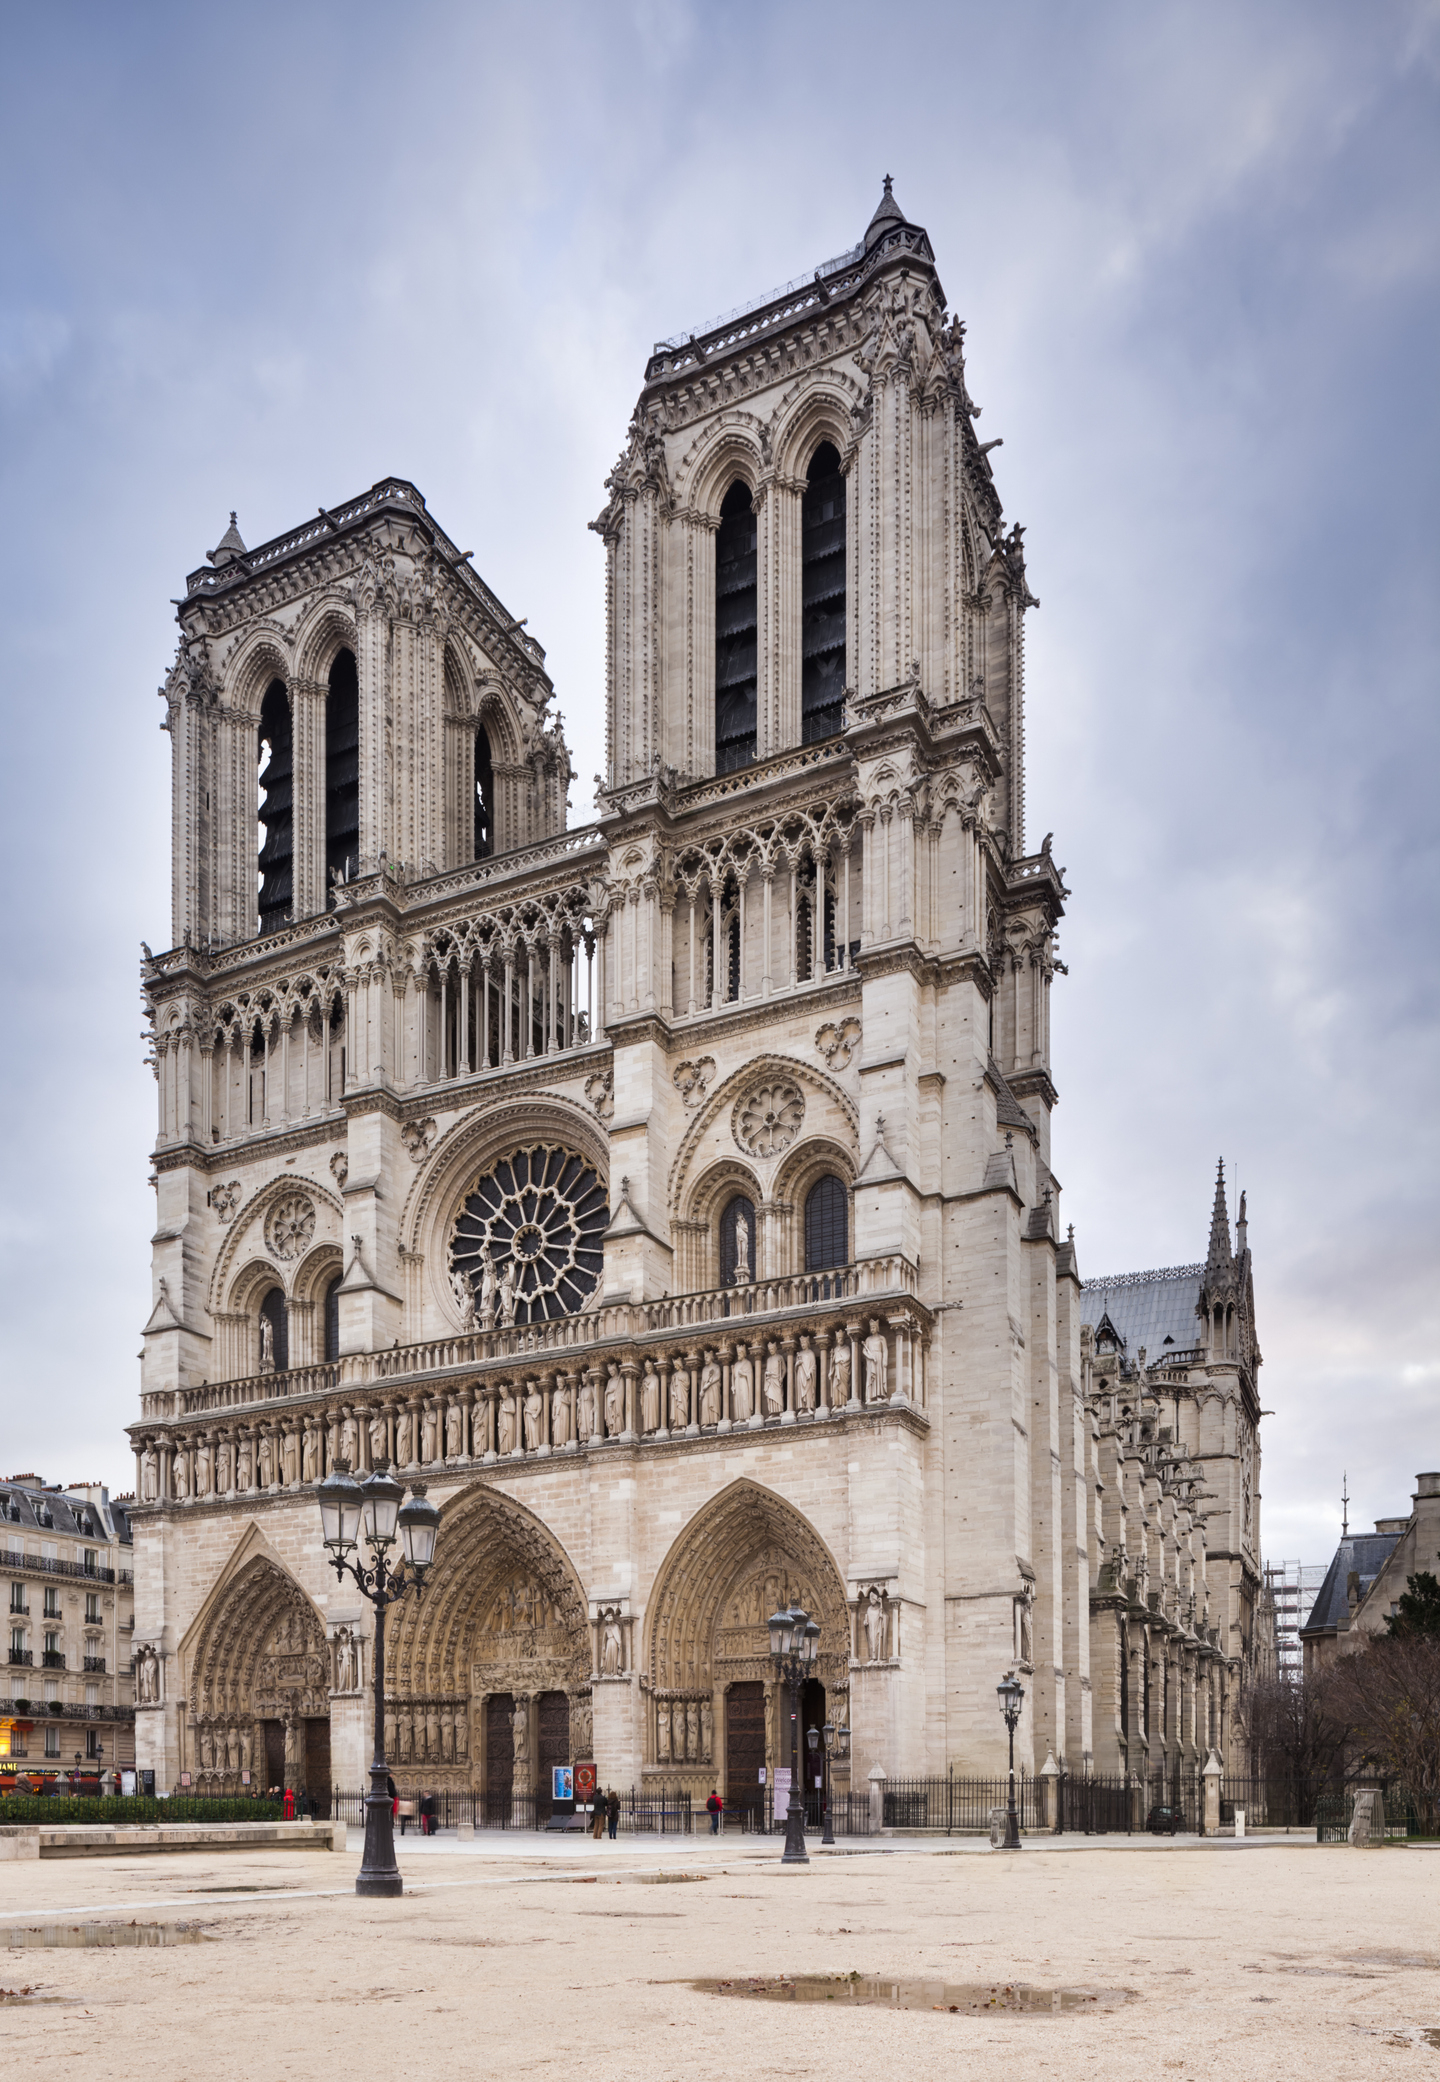 Notre-Dame Cathedral in Paris, showing its iconic twin towers and the large rose window, with a clear view of the facade